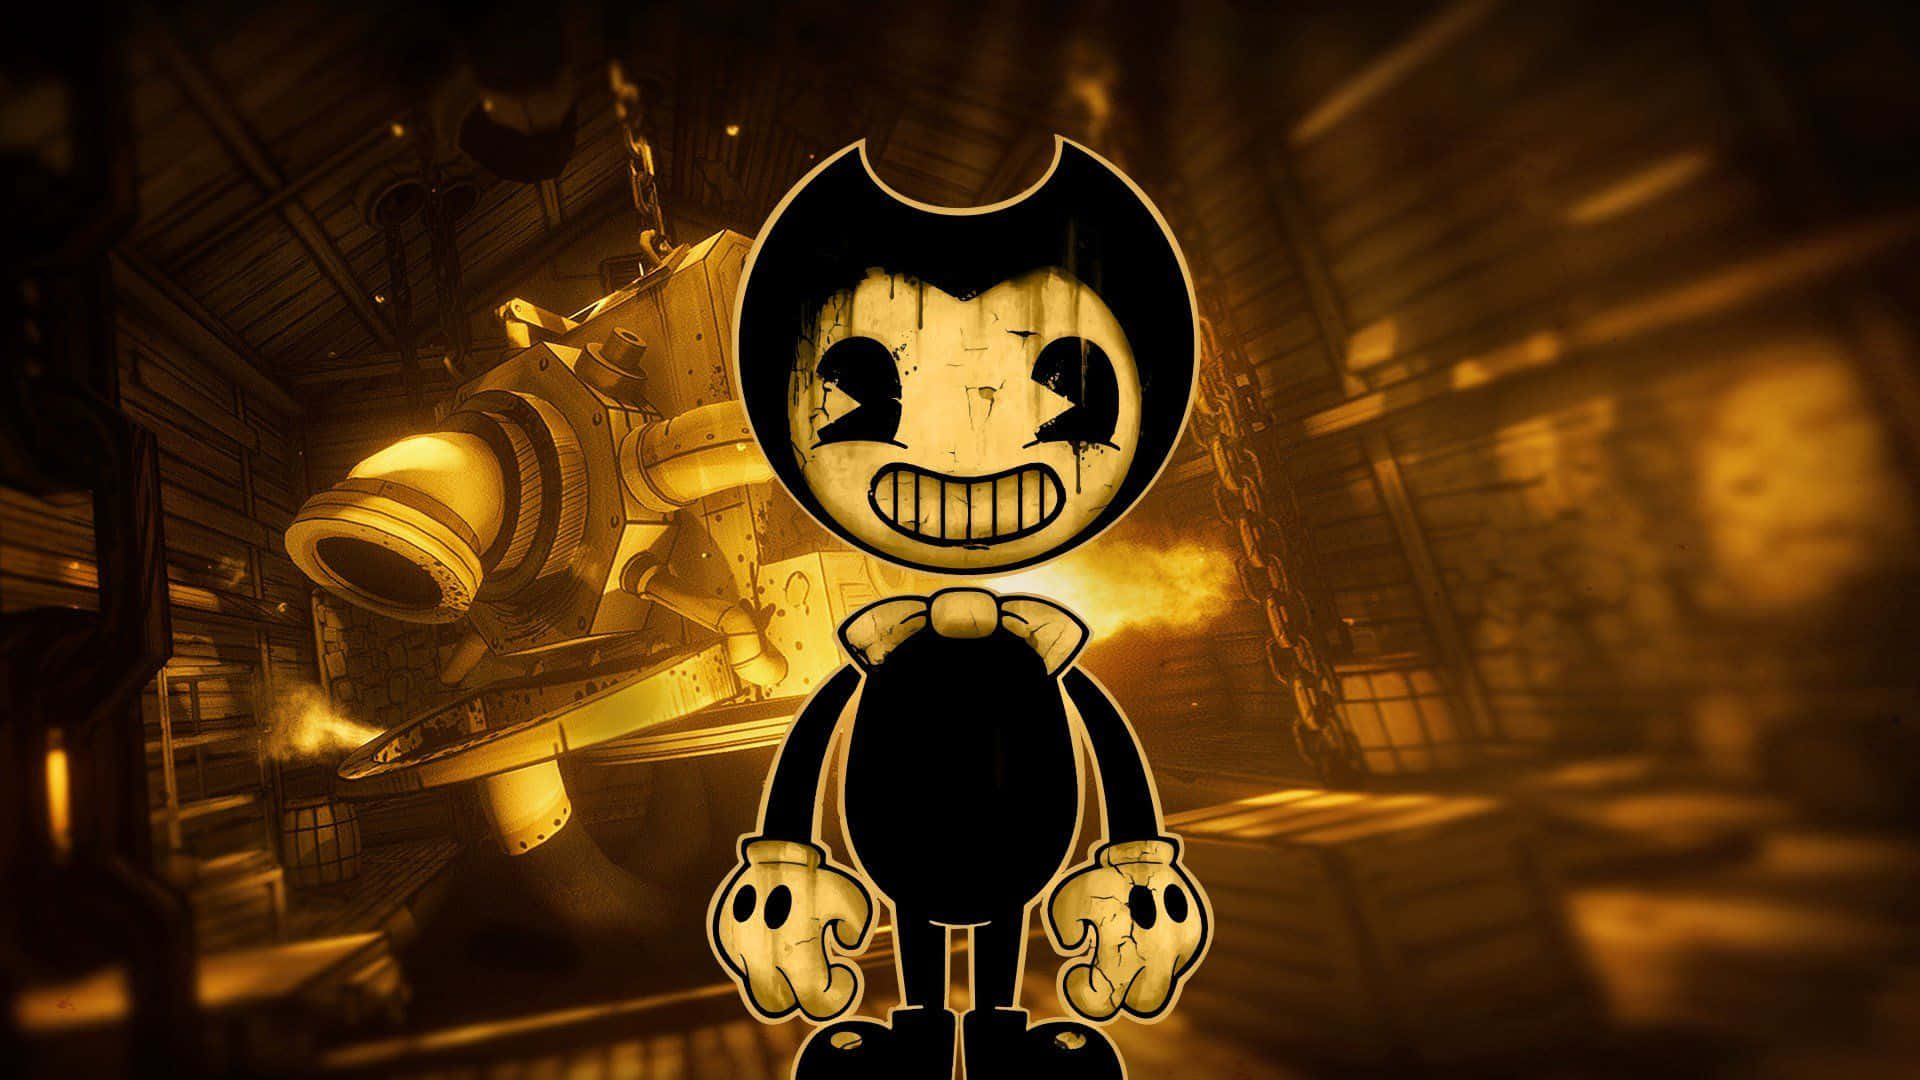 Bendy Striking A Pose In The Vintage World Of Animation